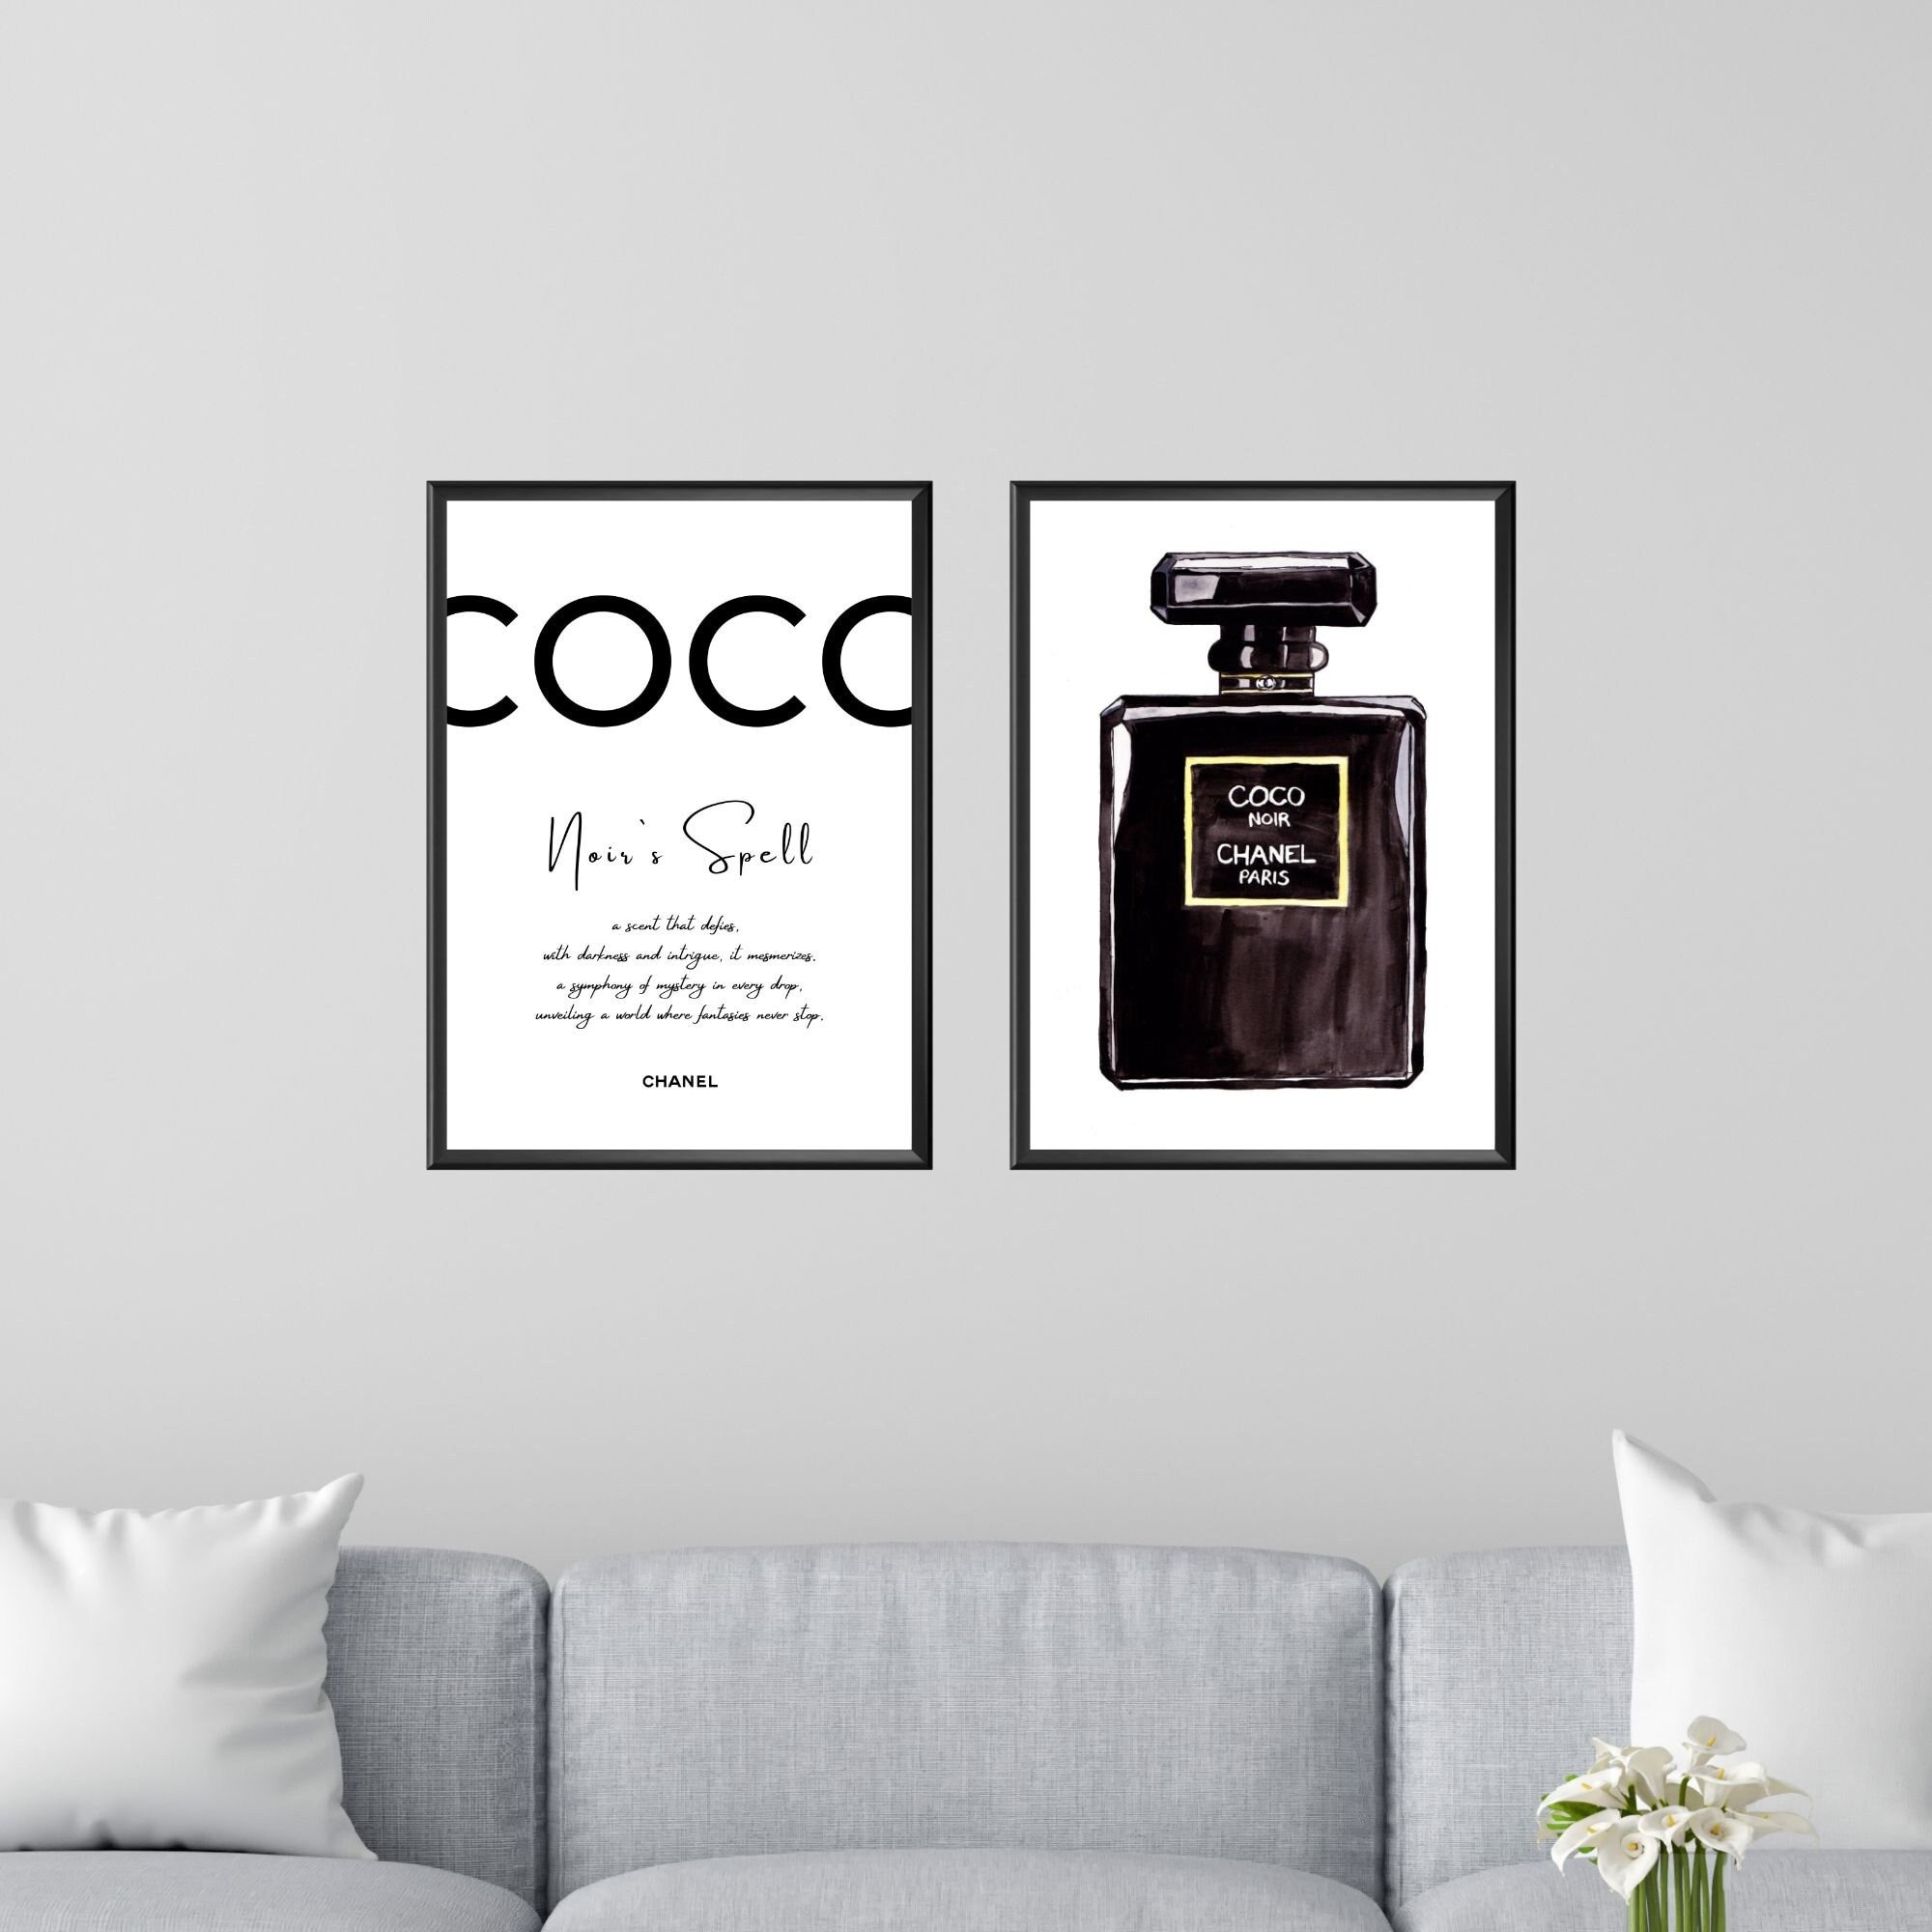 Romantic gallery wall paris posters coco chanel posters golden frames